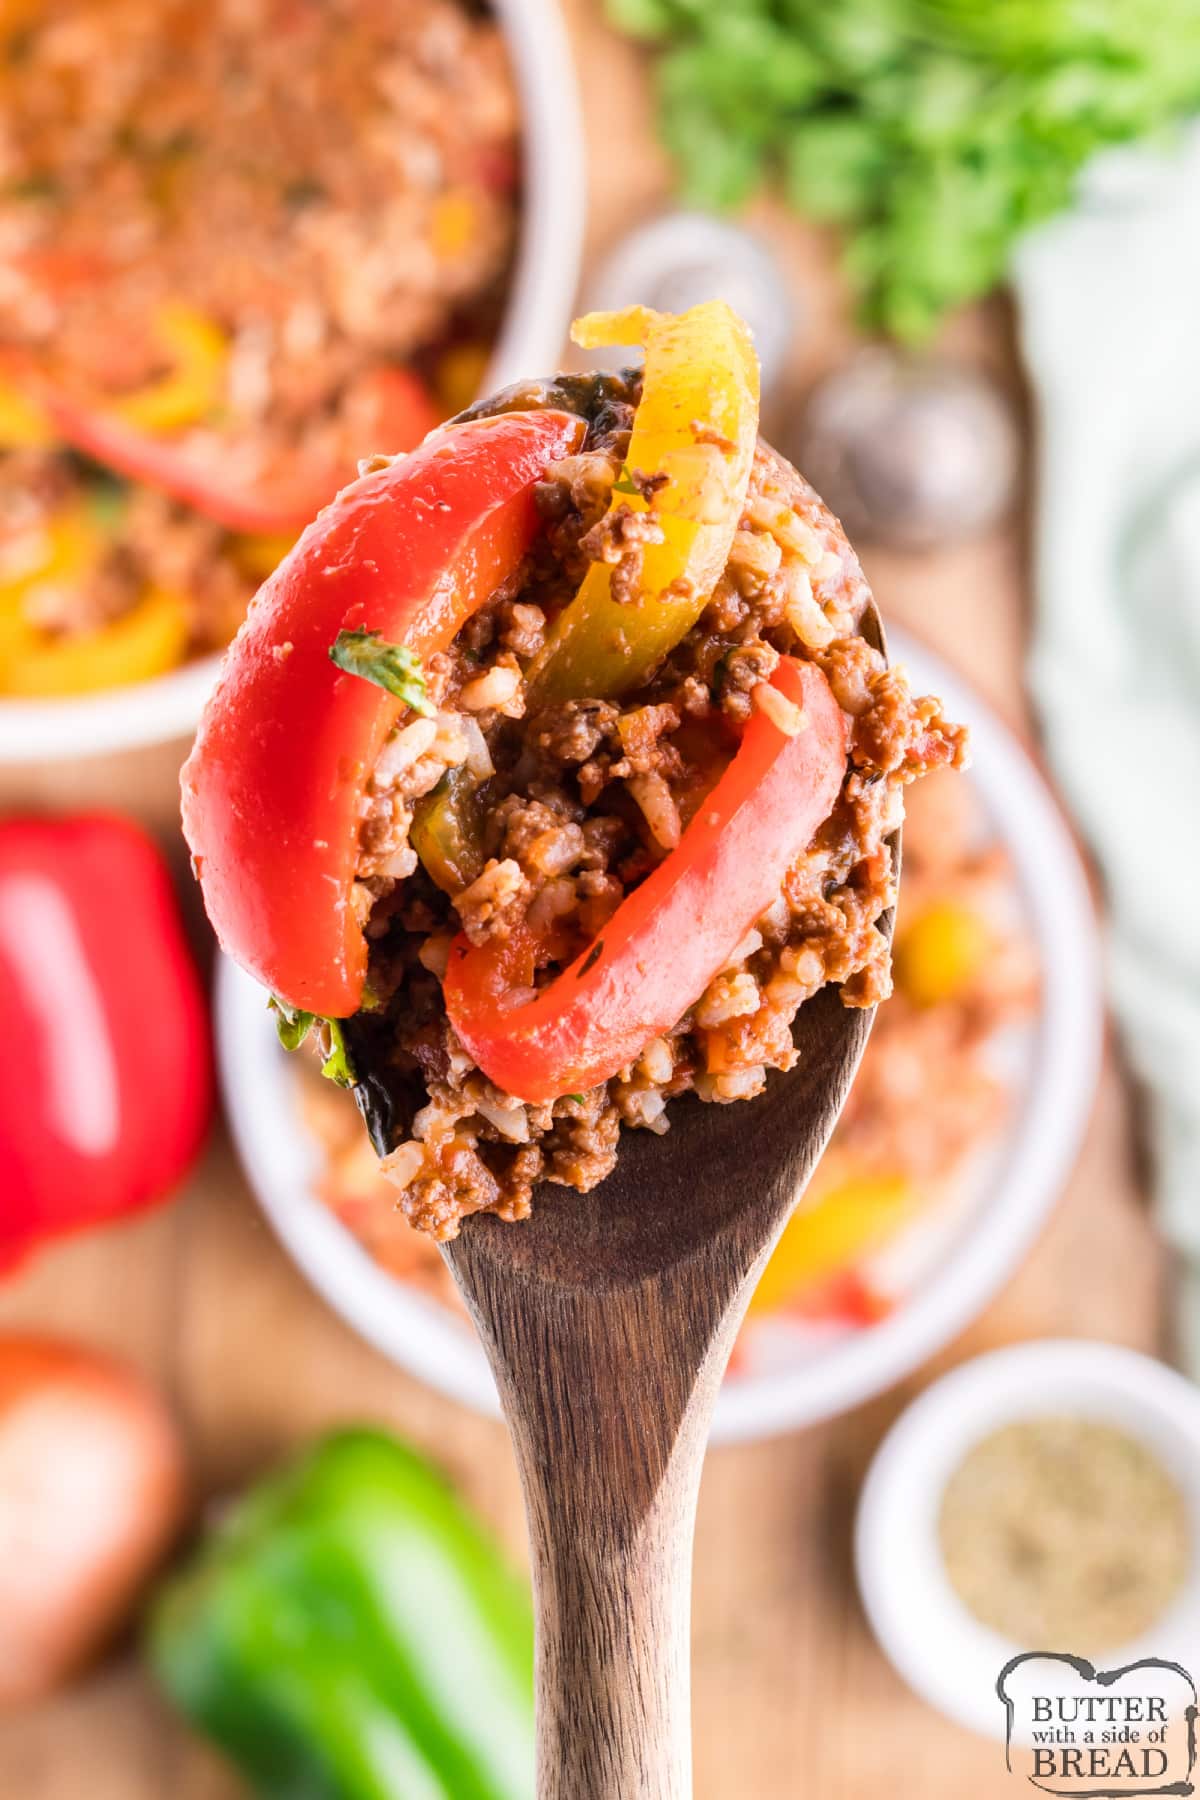 One-Pot Stuffed Pepper Casserole made in less than 30 minutes is the perfect weeknight dinner recipe. Delicious casserole recipe made with ground beef, rice, peppers, and tons of flavor! 